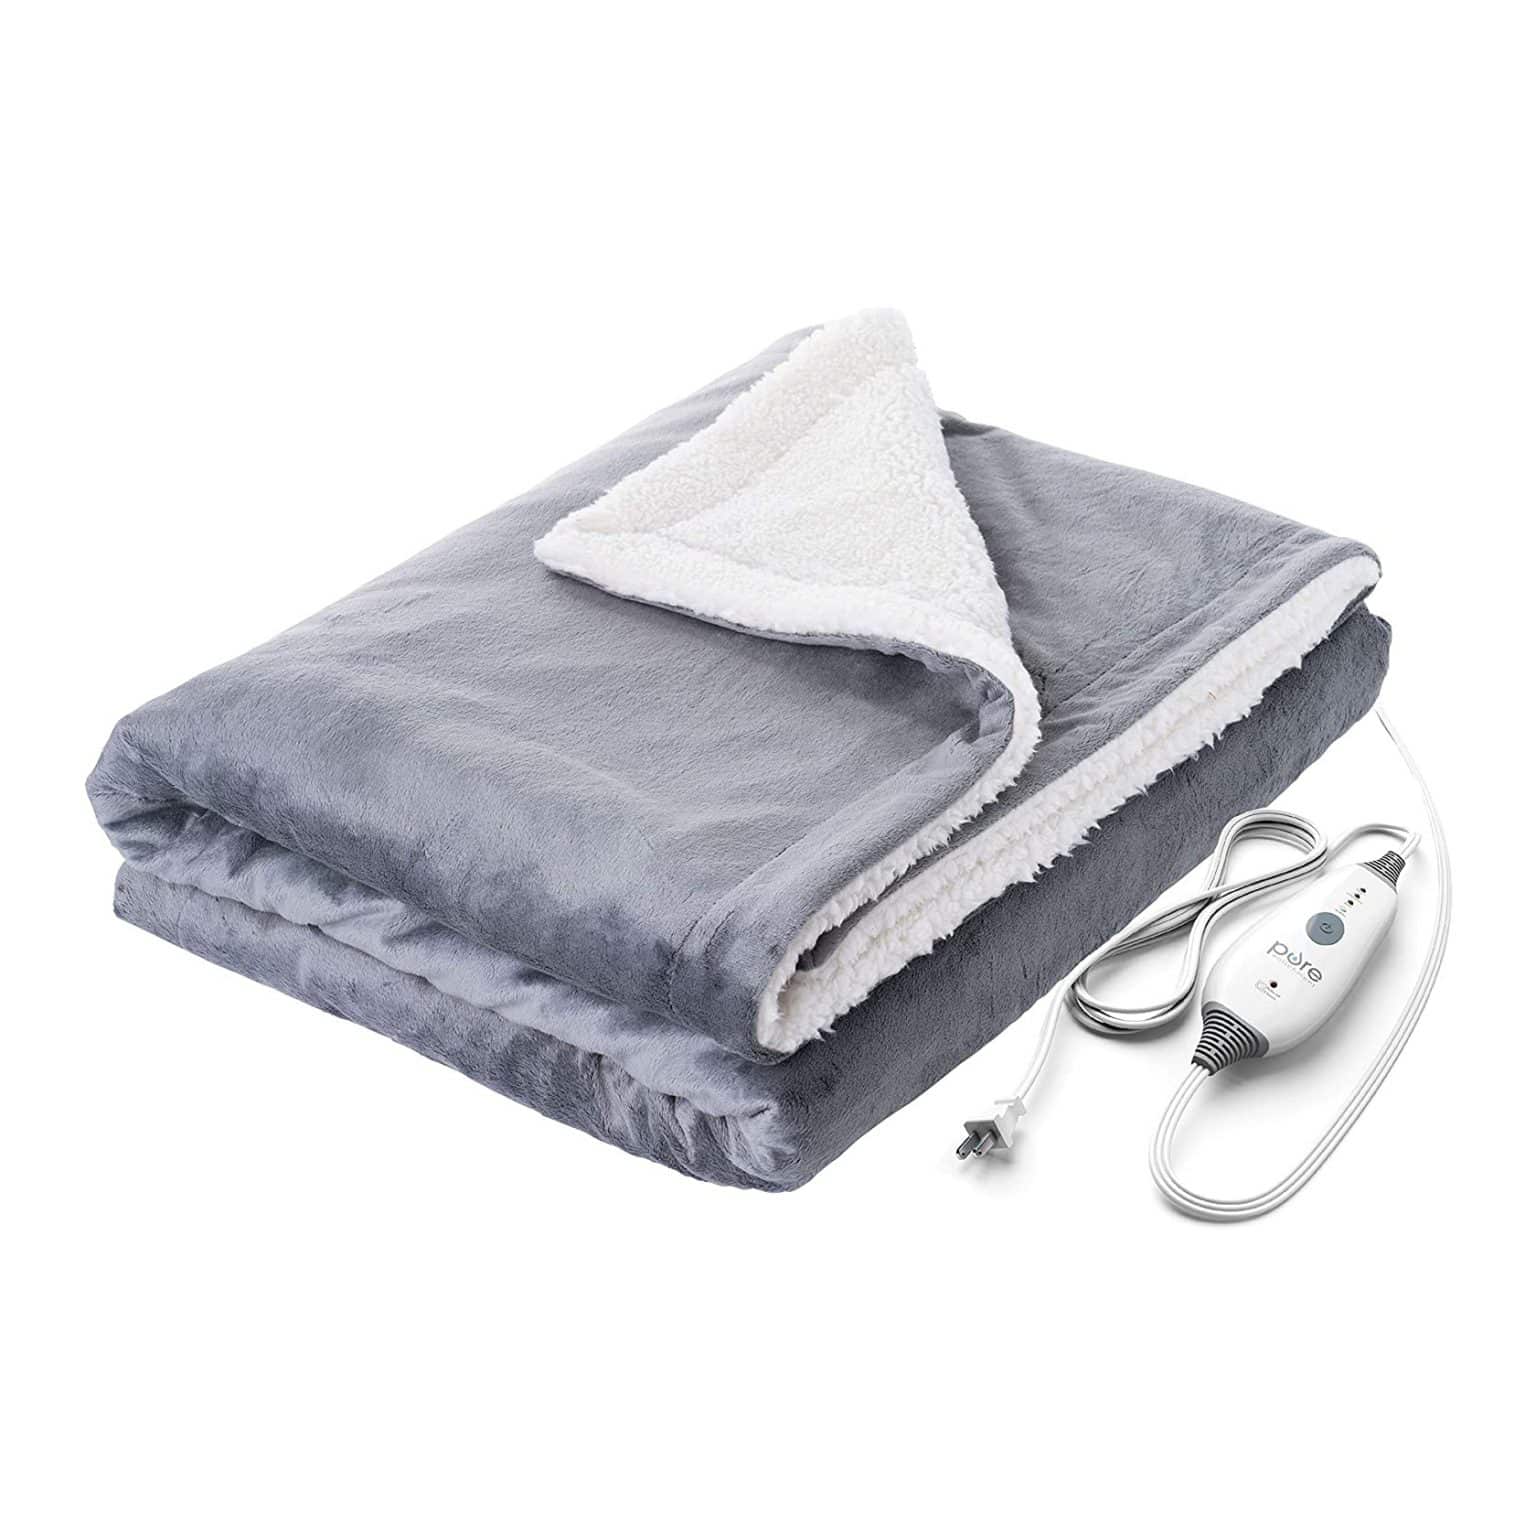 Top 10 Best Electric Throw Blankets in 2021 Reviews